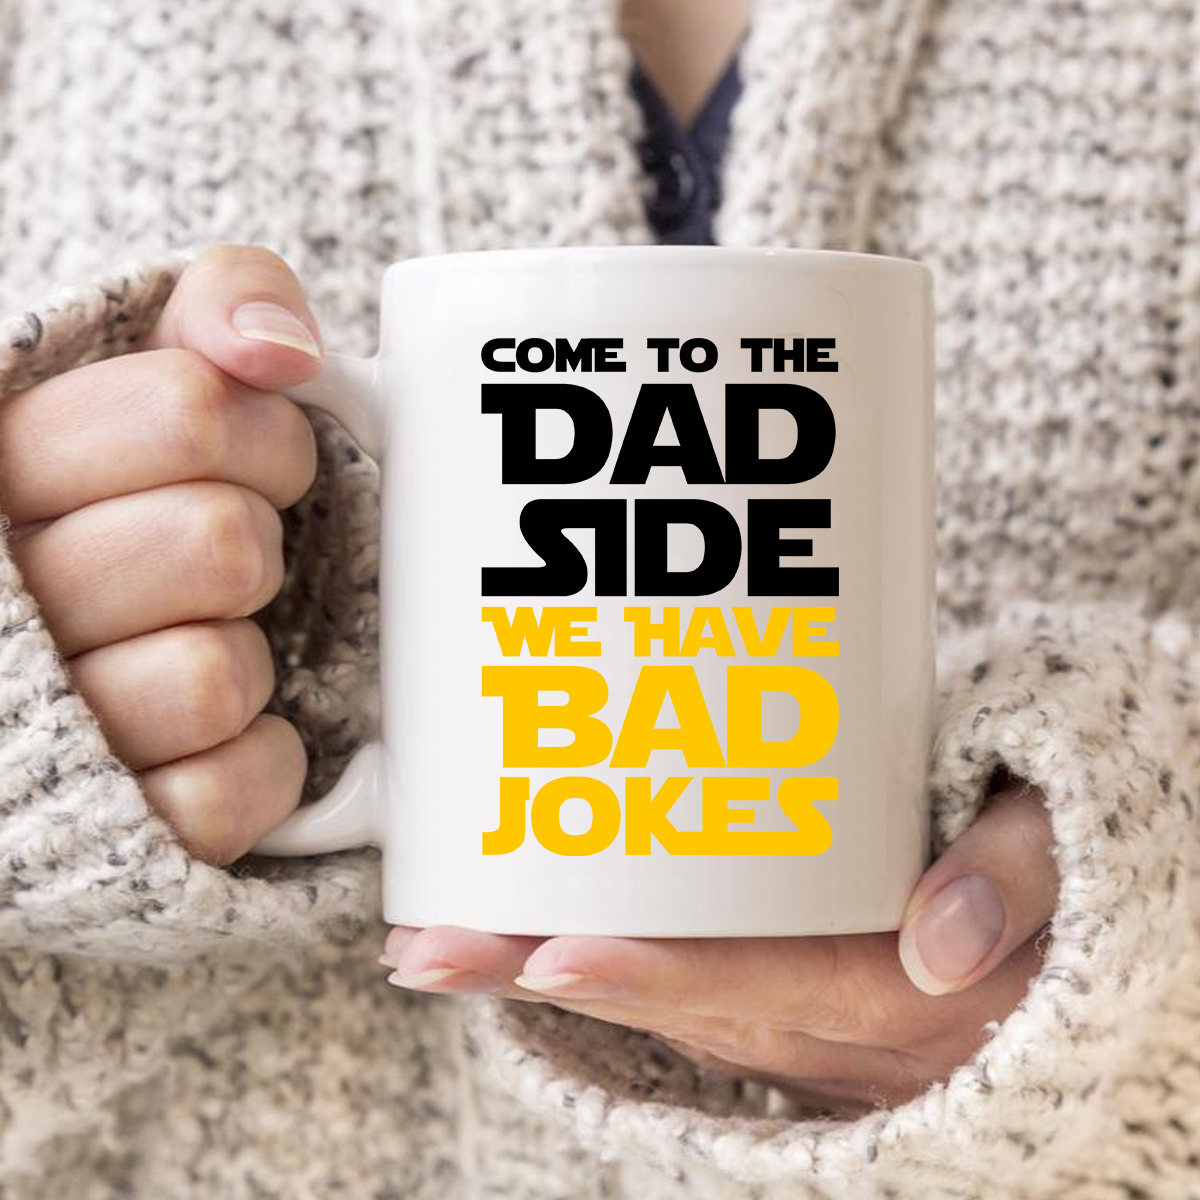 Come To The Dad Side We Have Bad Jokes Mug